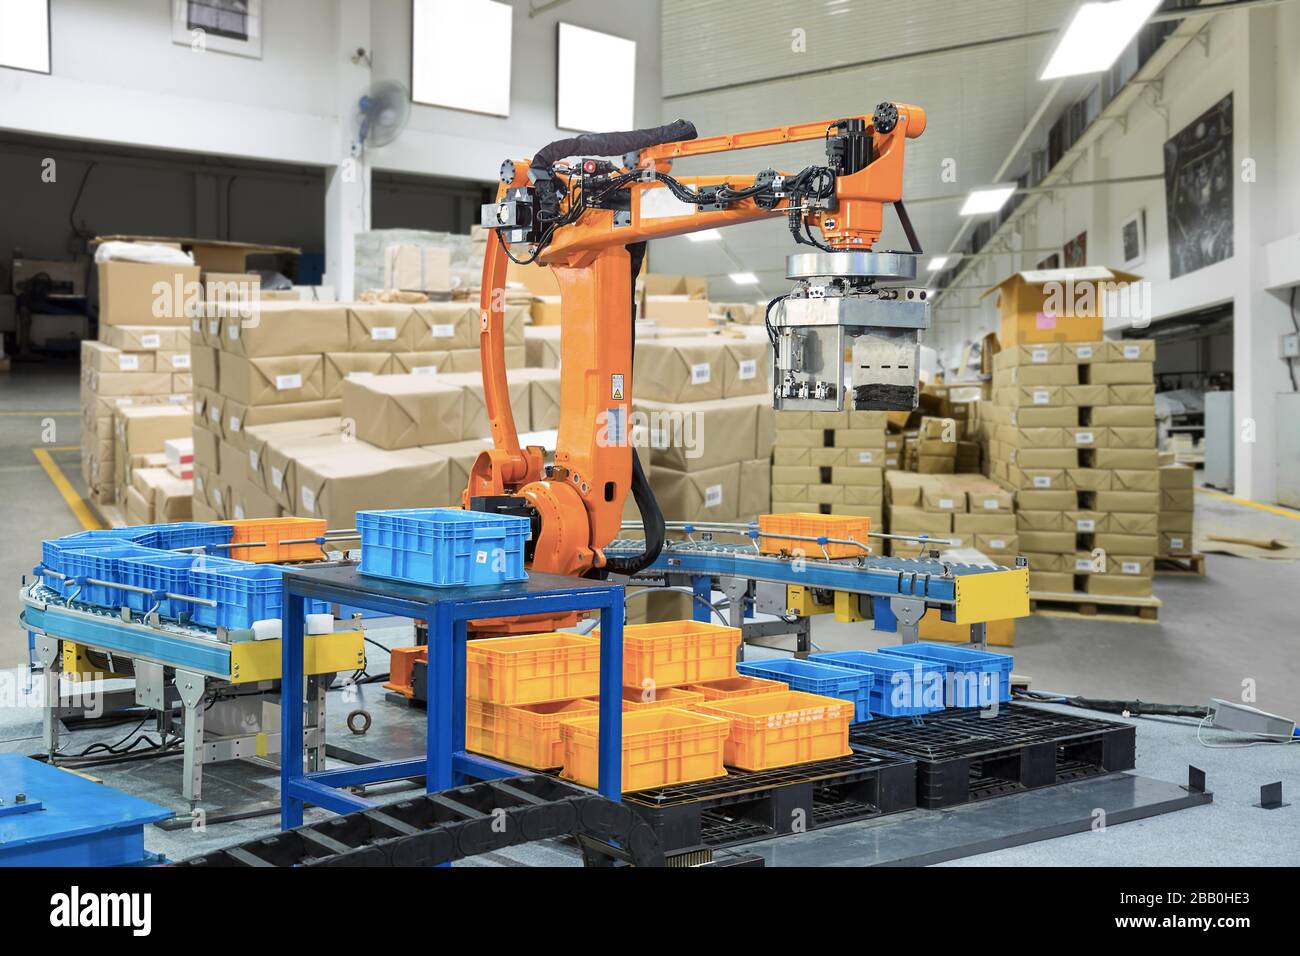 Material handling. Material handling Equipment. Robot Arm for Automatic Production line. Material handling Equipment (MHE) warehausing foto.